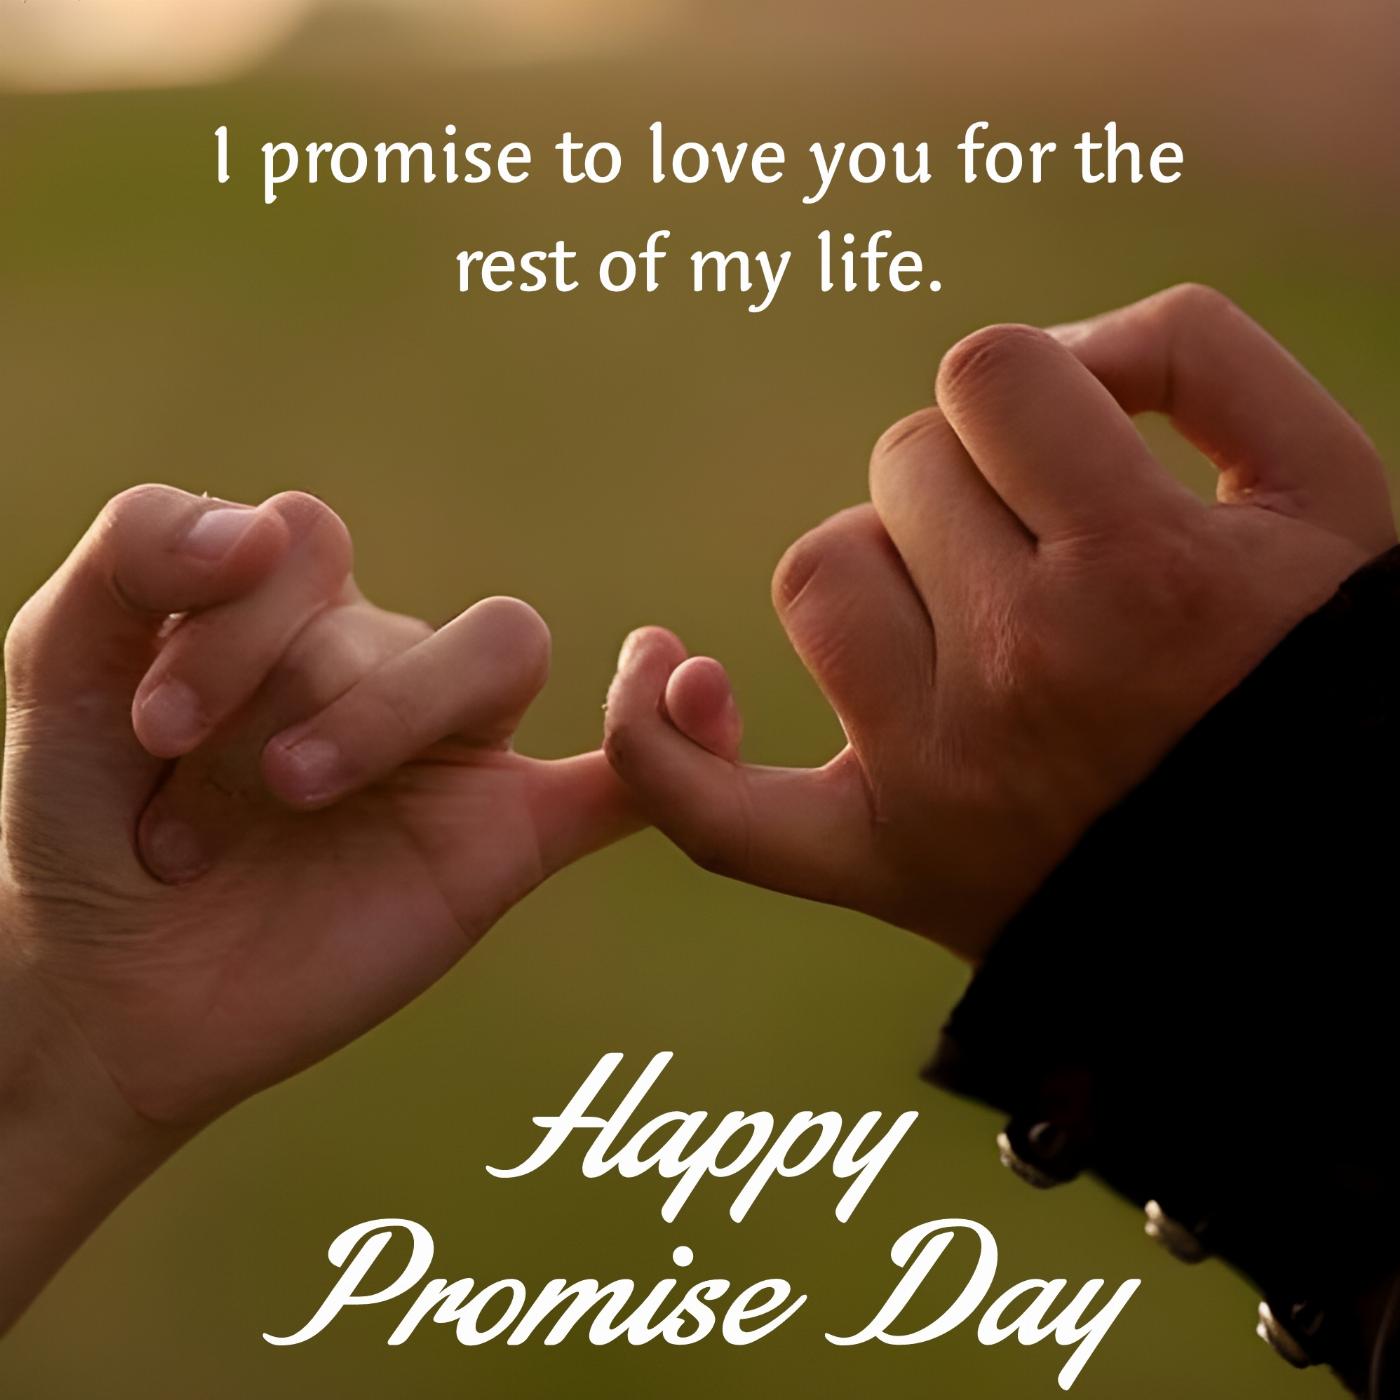 I promise to love you for the rest of my life